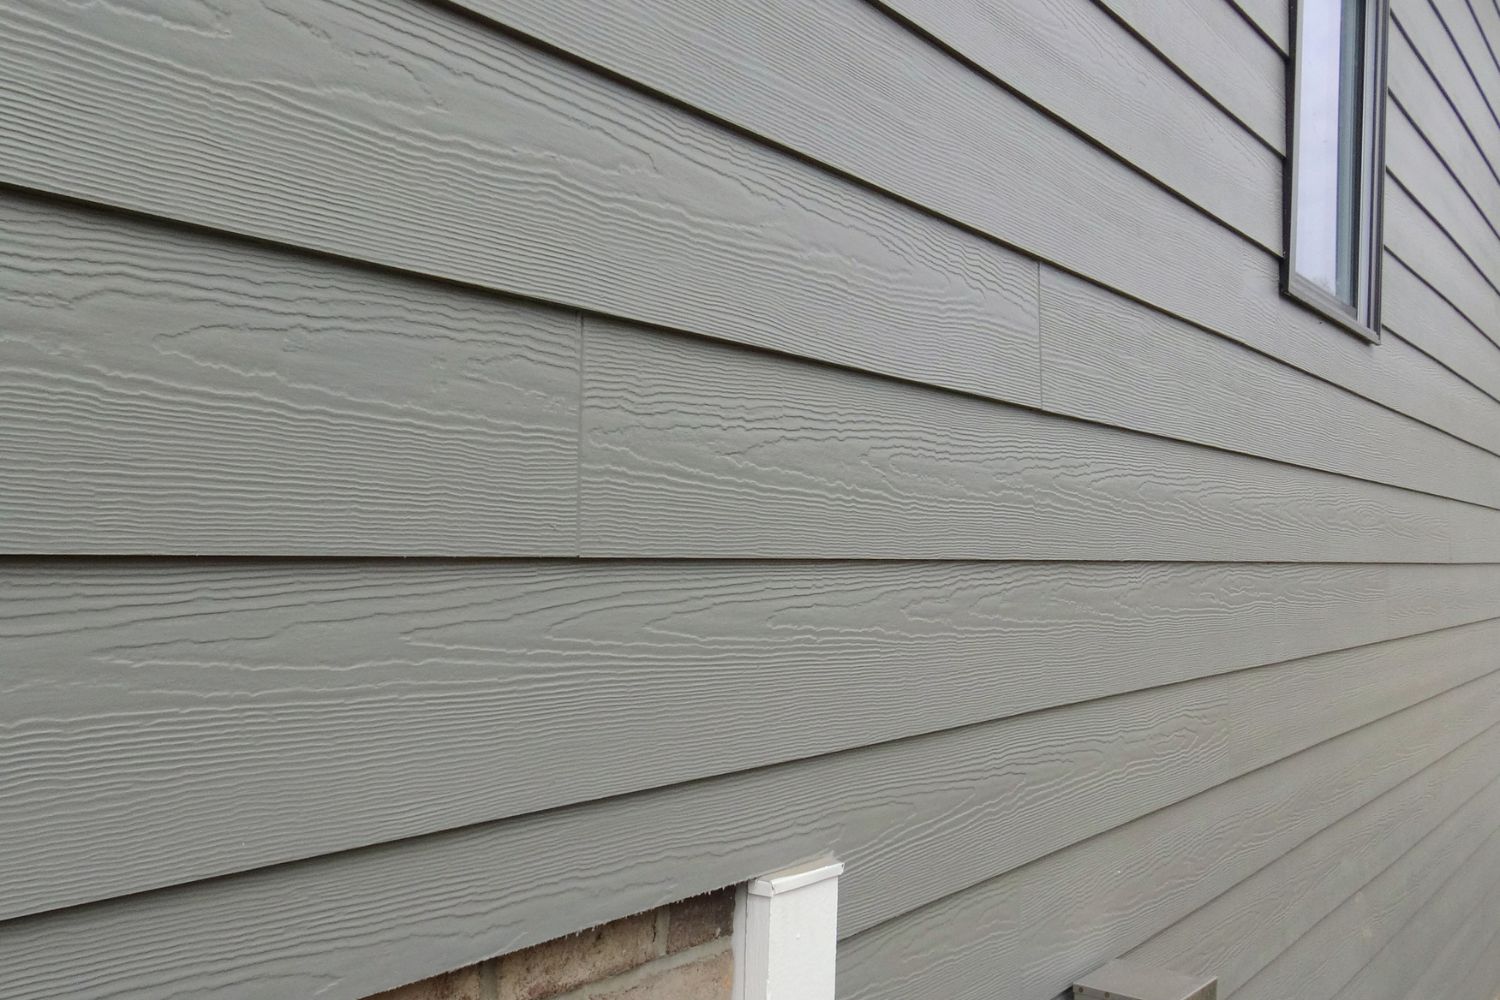 A close up of brand new siding on a house.